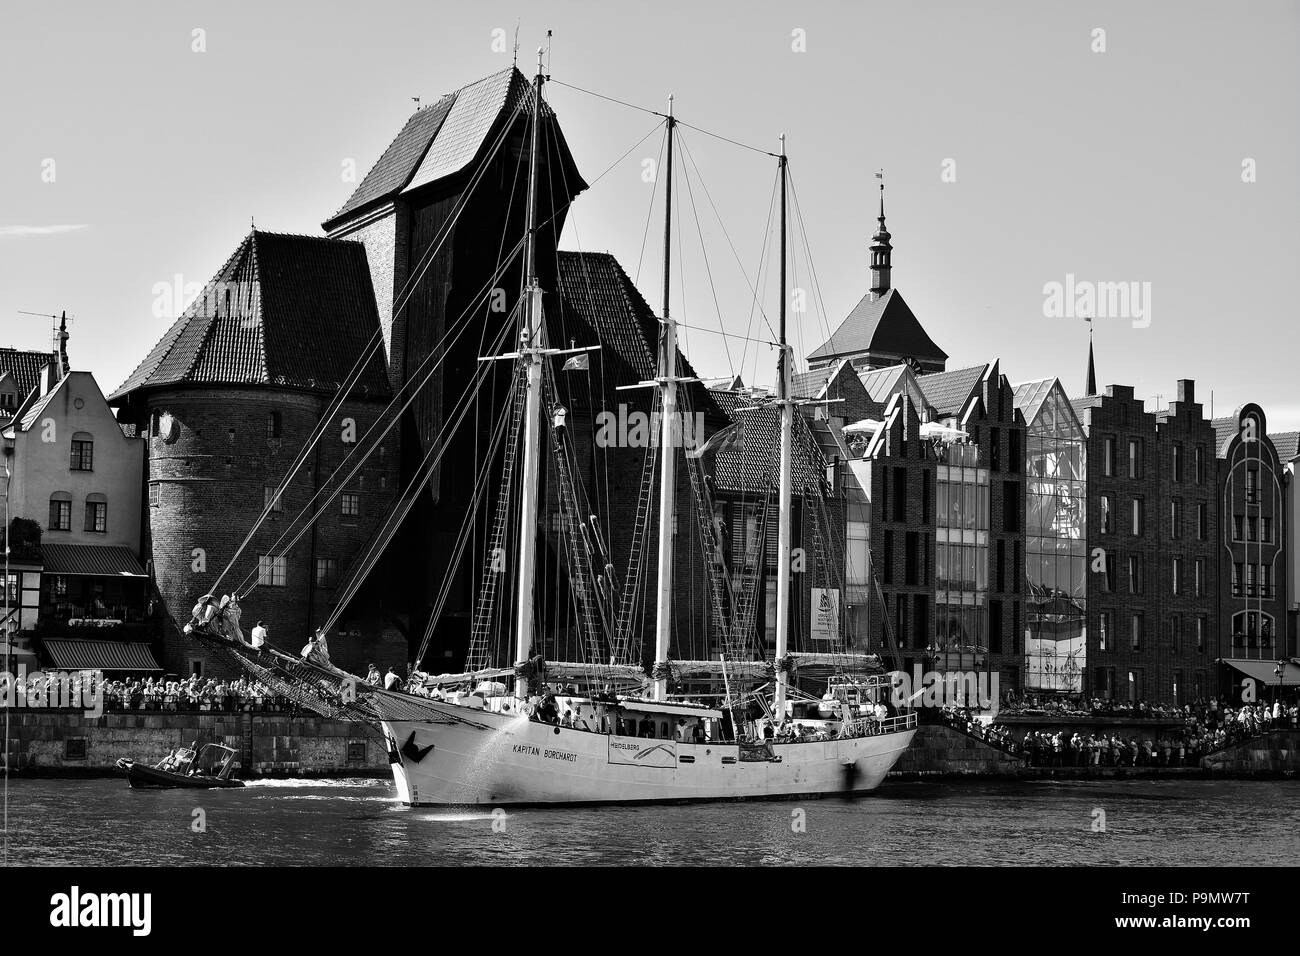 GDANSK, POLAND - JULY 8, 2018. Sailing Ships Parade on Motlawa River during 22nd edition of Baltic Sail  in the Gulf of Gdansk, Poland. Stock Photo